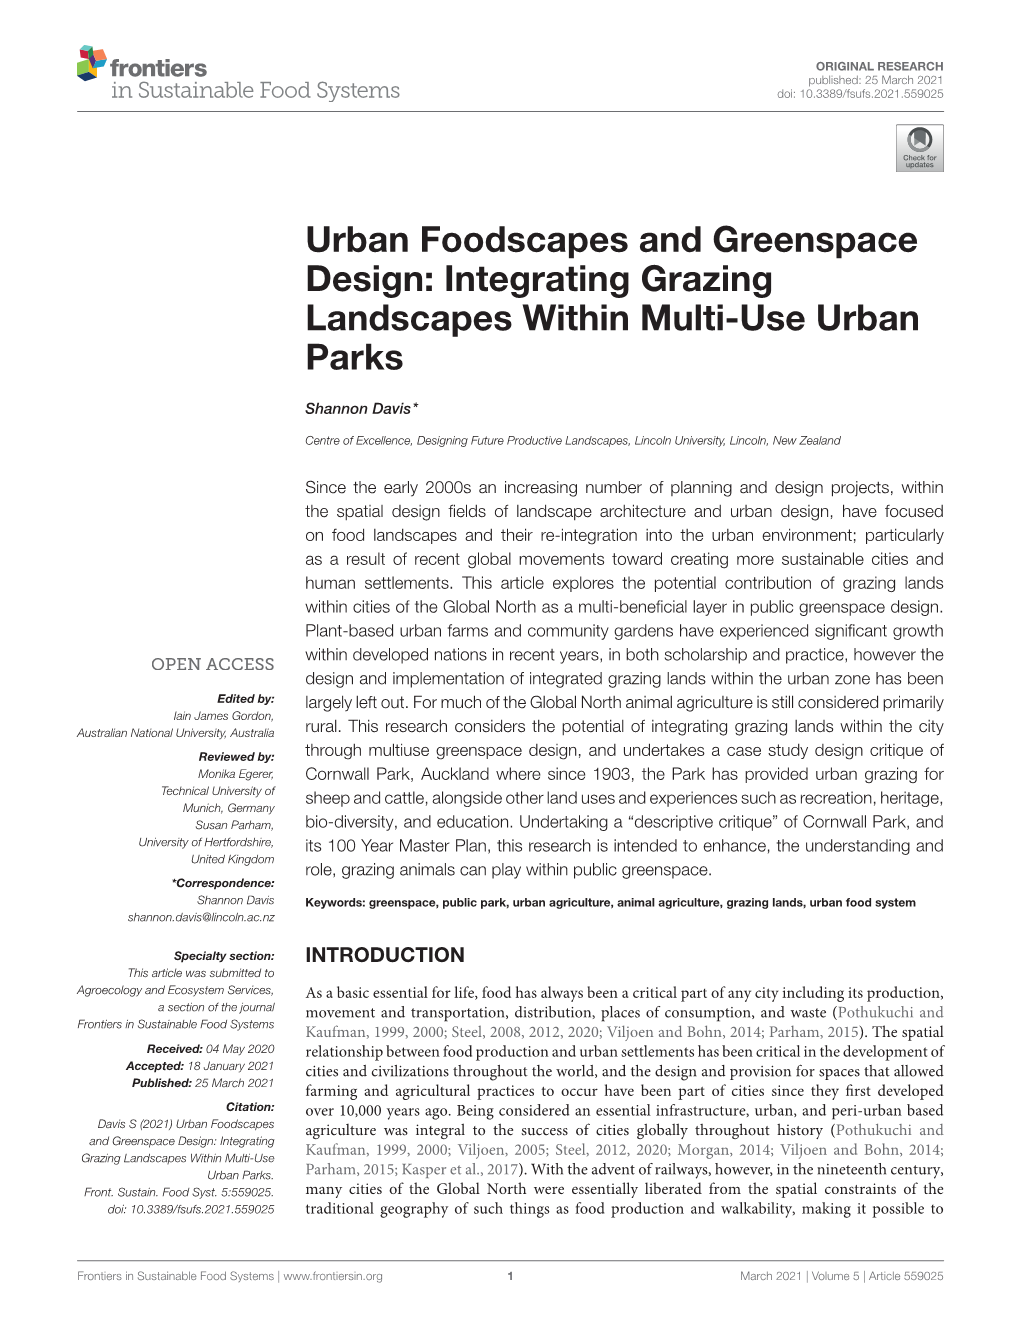 Urban Foodscapes and Greenspace Design: Integrating Grazing Landscapes Within Multi-Use Urban Parks